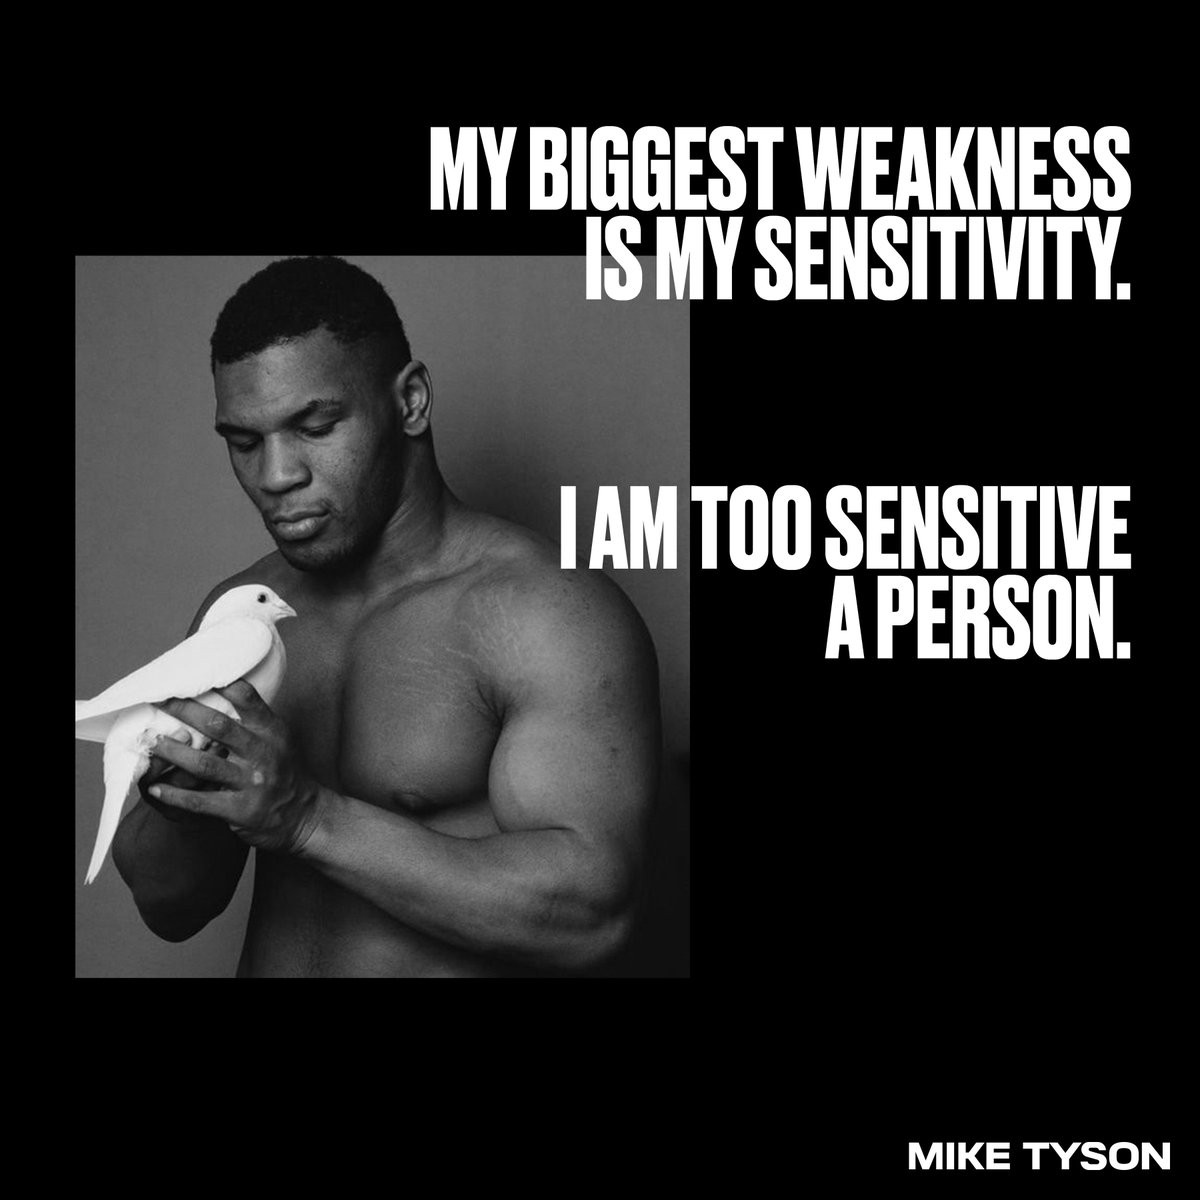 My biggest weakness is my sensitivity. I am too sensitive a person. #miketyson https://t.co/yaKxszwYih